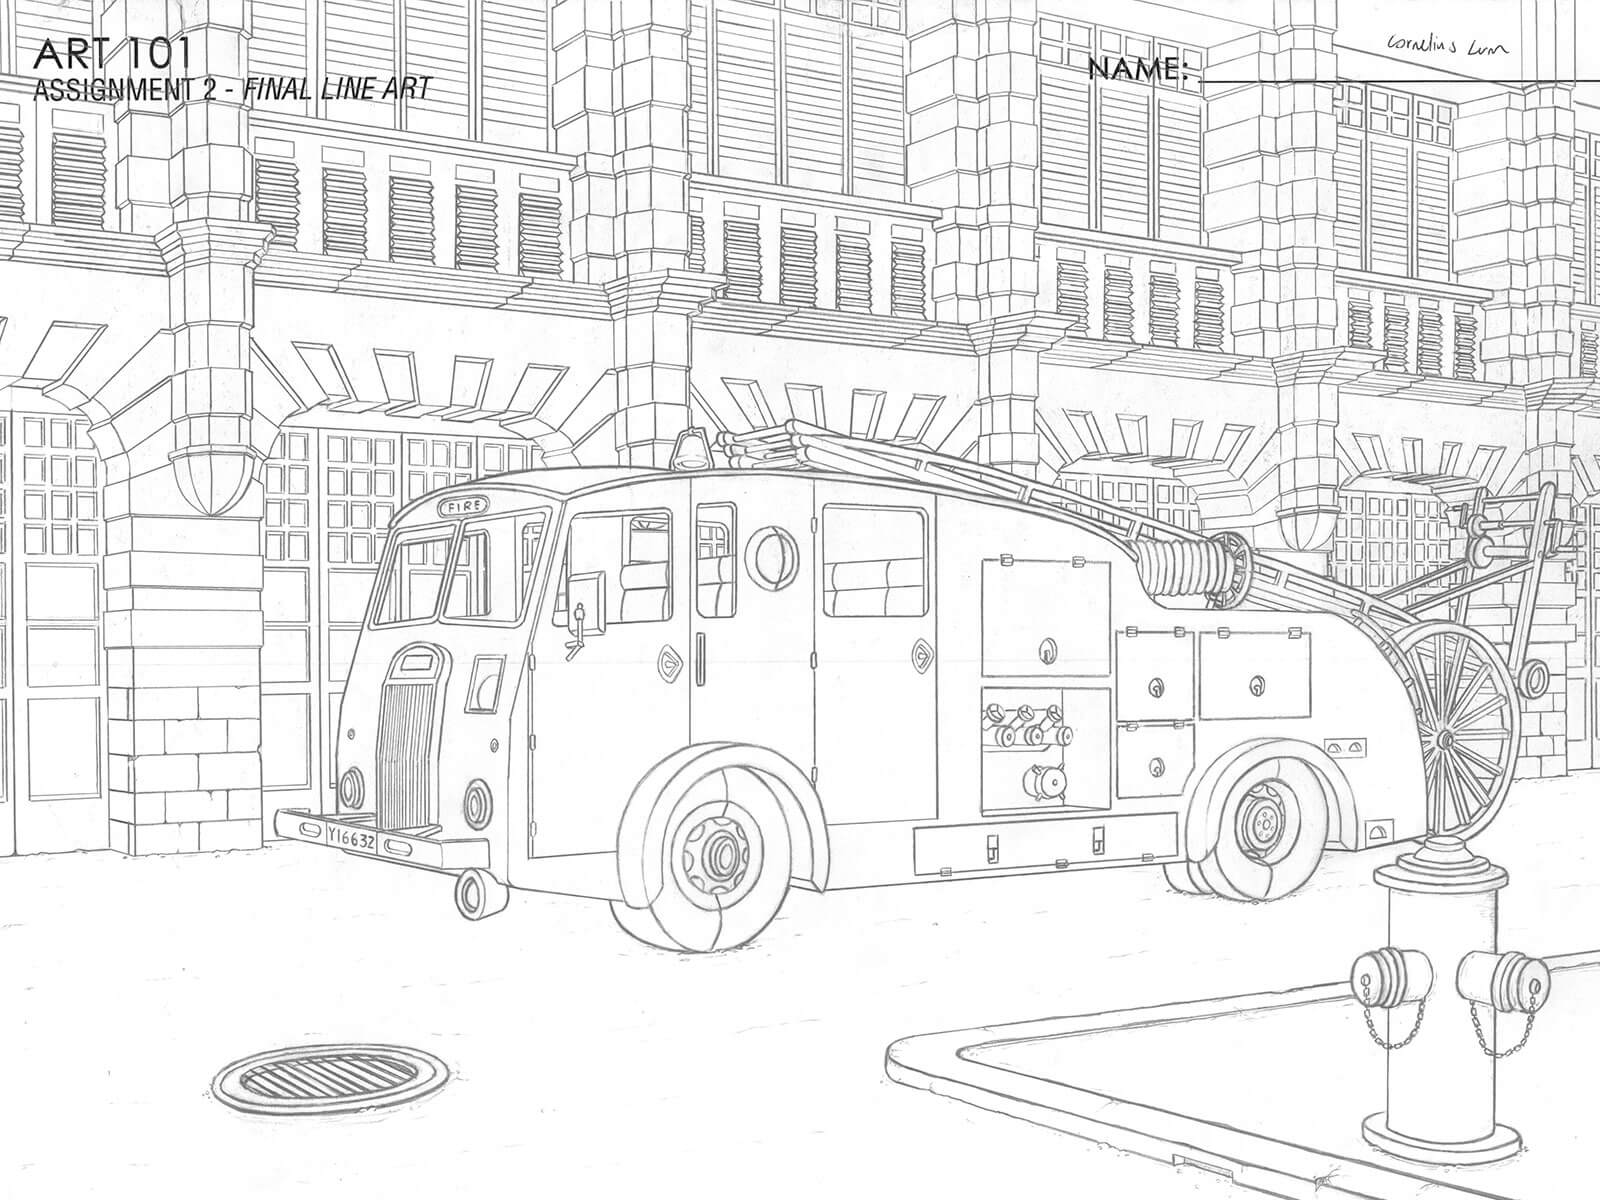 Black-and-white sketch of a fire engine next to a building.